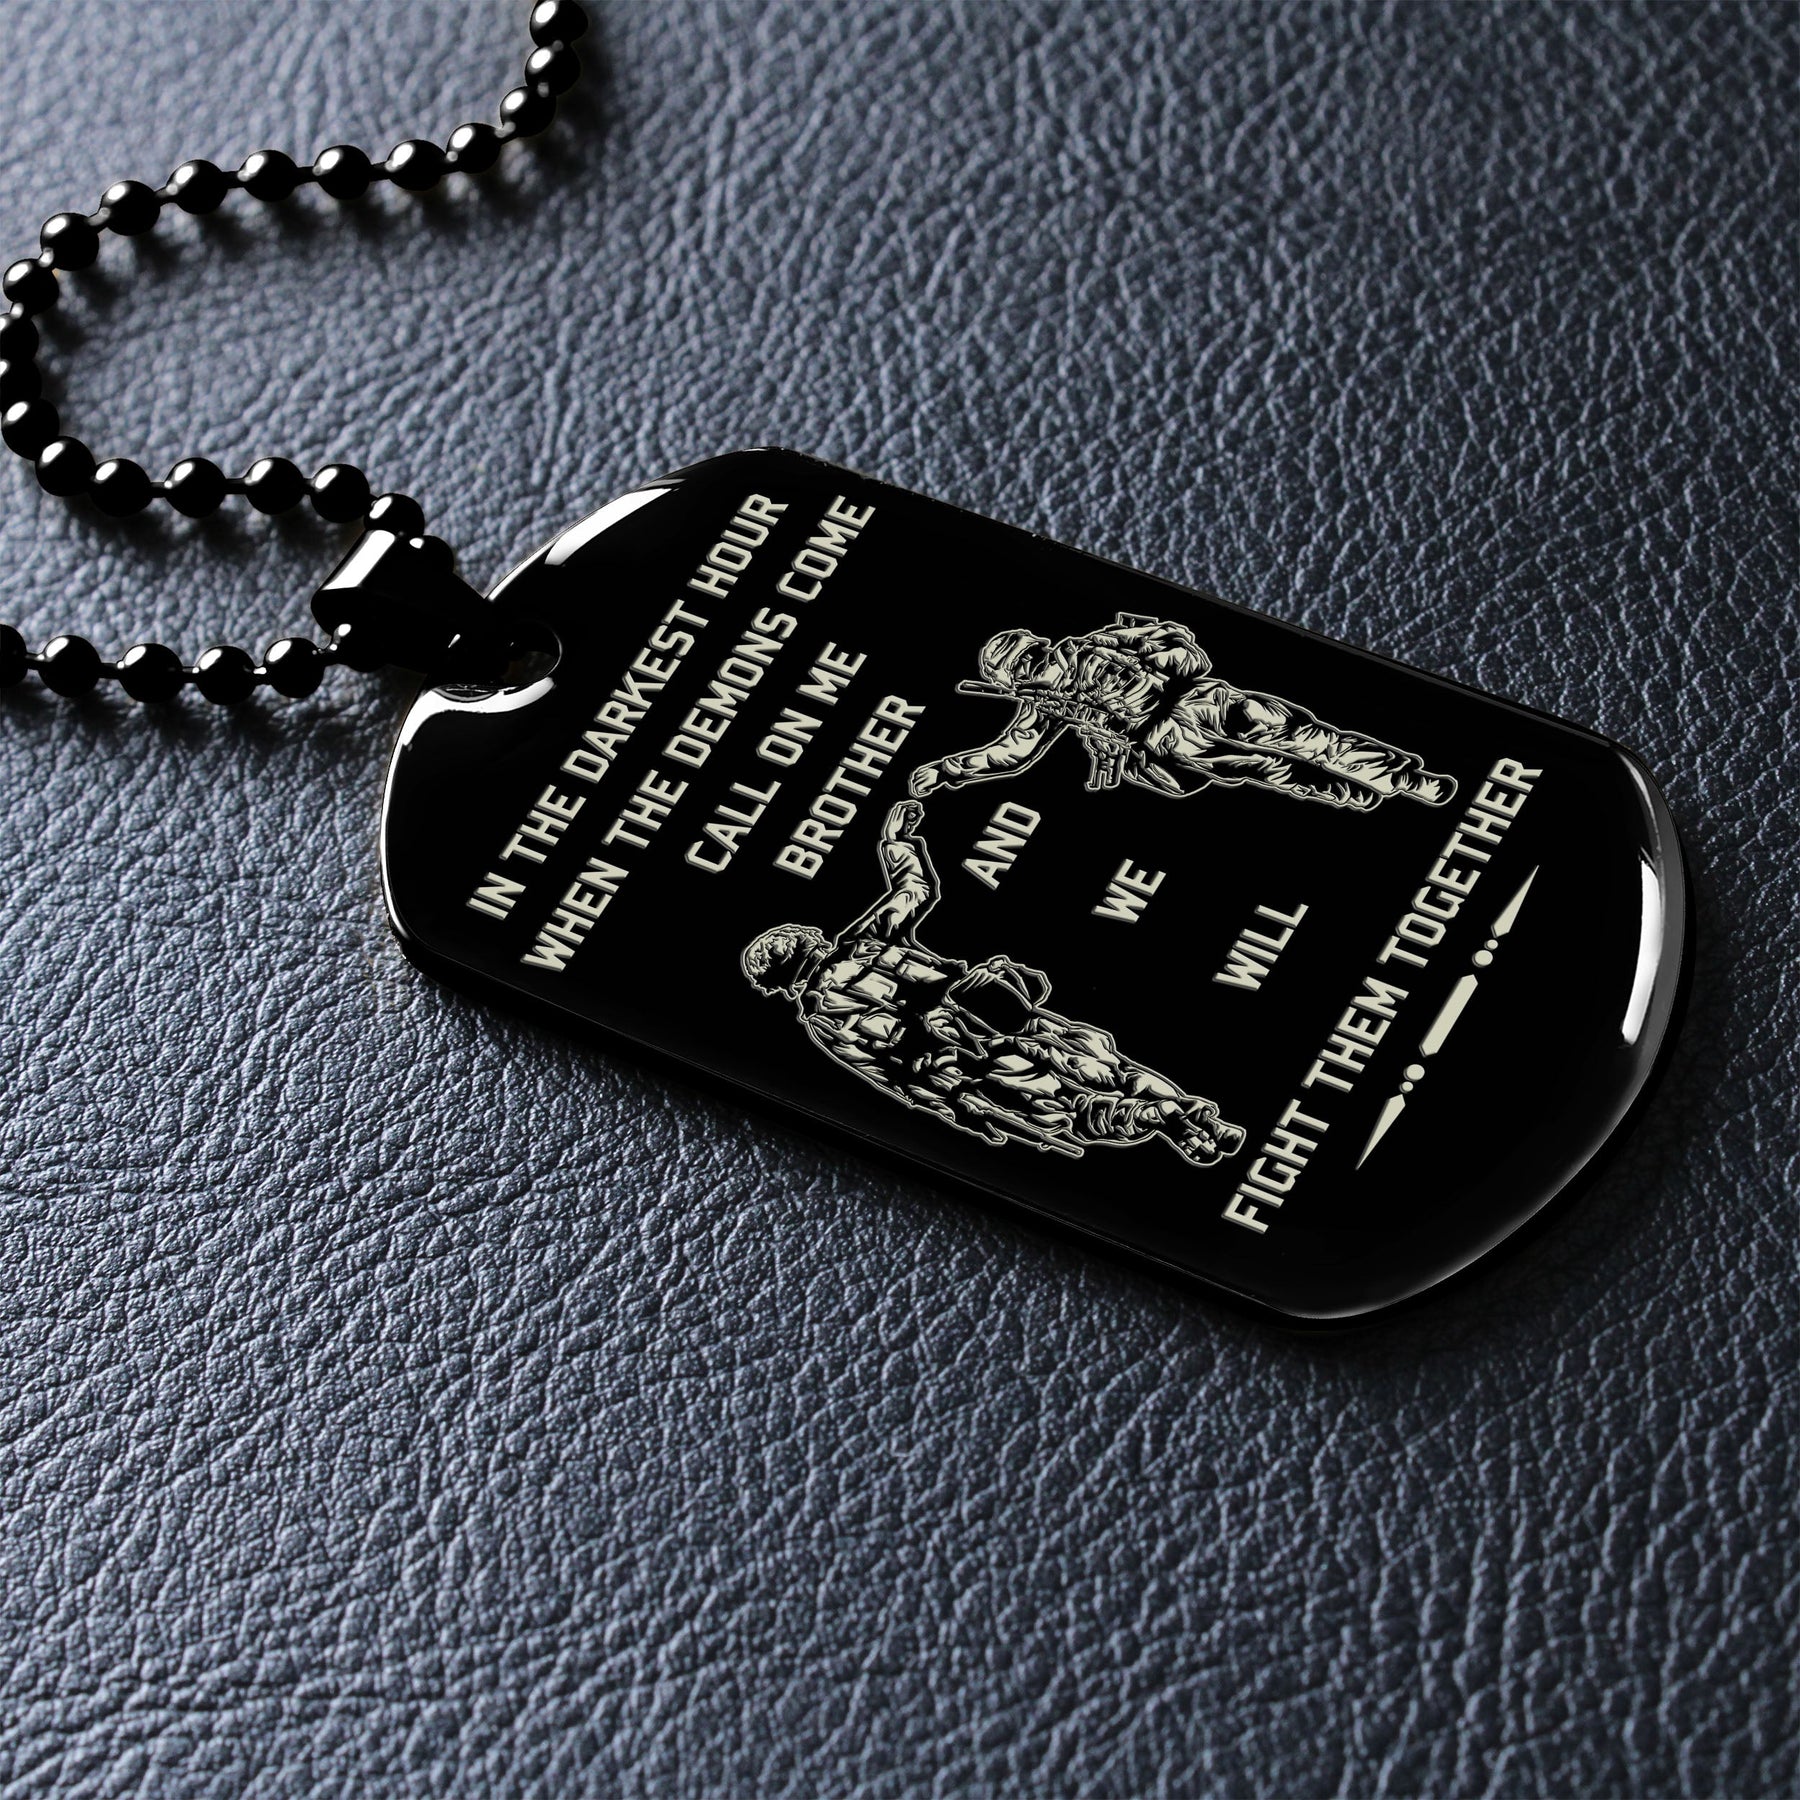 SDD029 - Call On Me Brother - English - Quitting Is Not - Slodier Dog Tag - Engrave Double Black Dog Tag